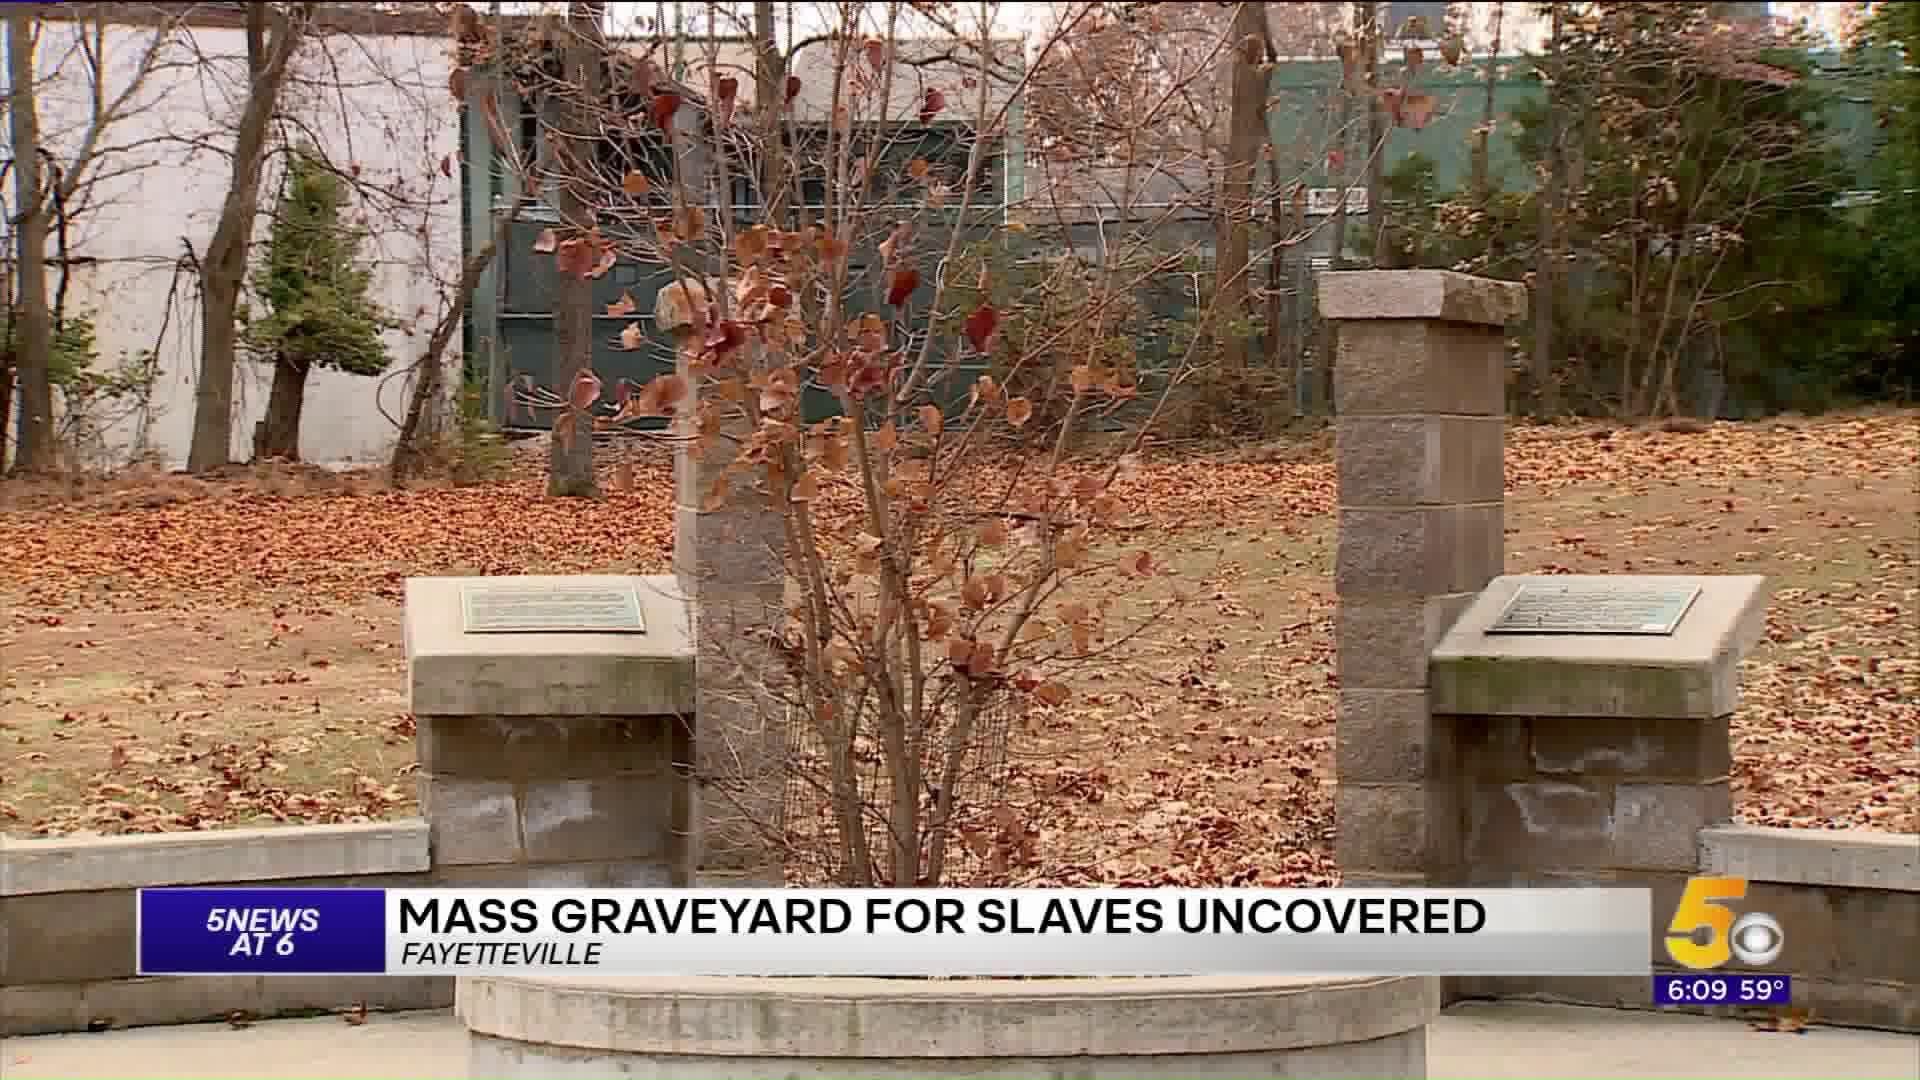 Mass Graveyard for Slaves Uncovered in Fayetteville